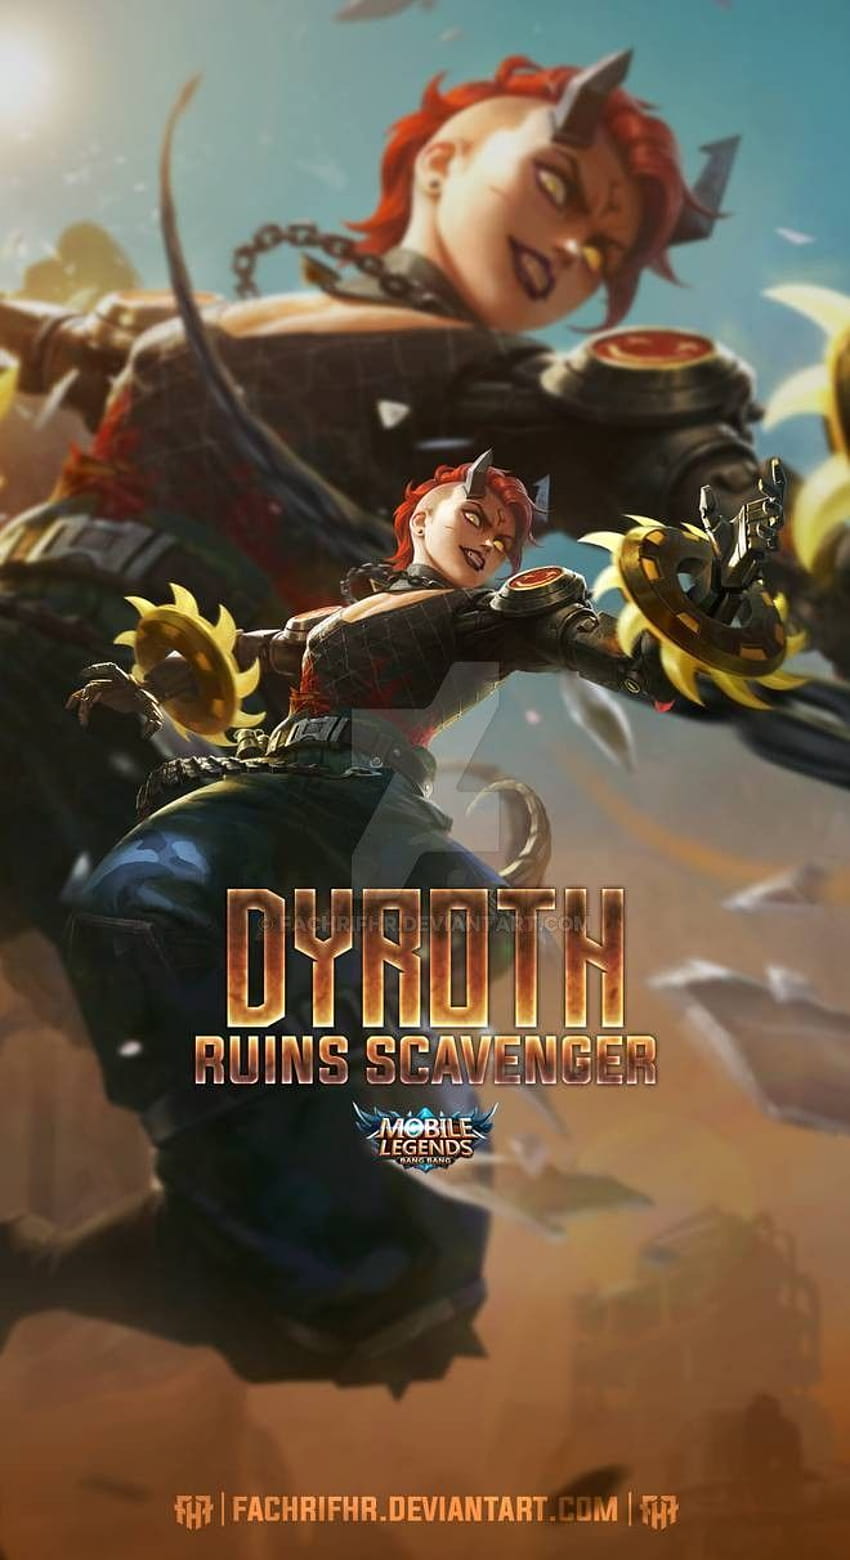 Dyroth Ruins Scavenger by FachriFHR in 2021, logo mobile legends 2021 HD phone wallpaper